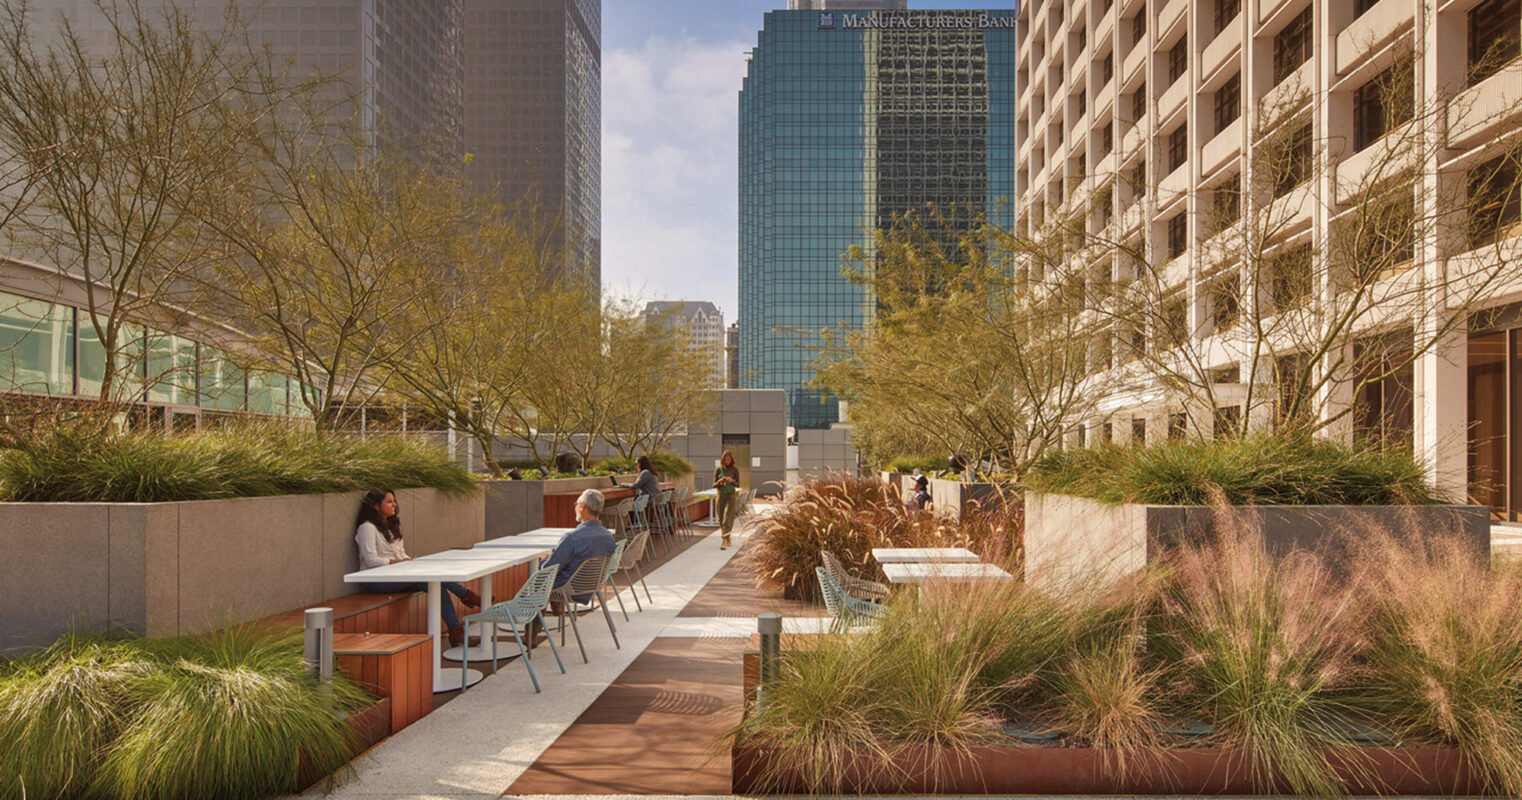 Modern urban terrace with raised planters featuring ornamental grasses and perennials, providing a green oasis amidst skyscrapers. Outdoor seating areas allow for socializing and relaxation in the heart of the city.